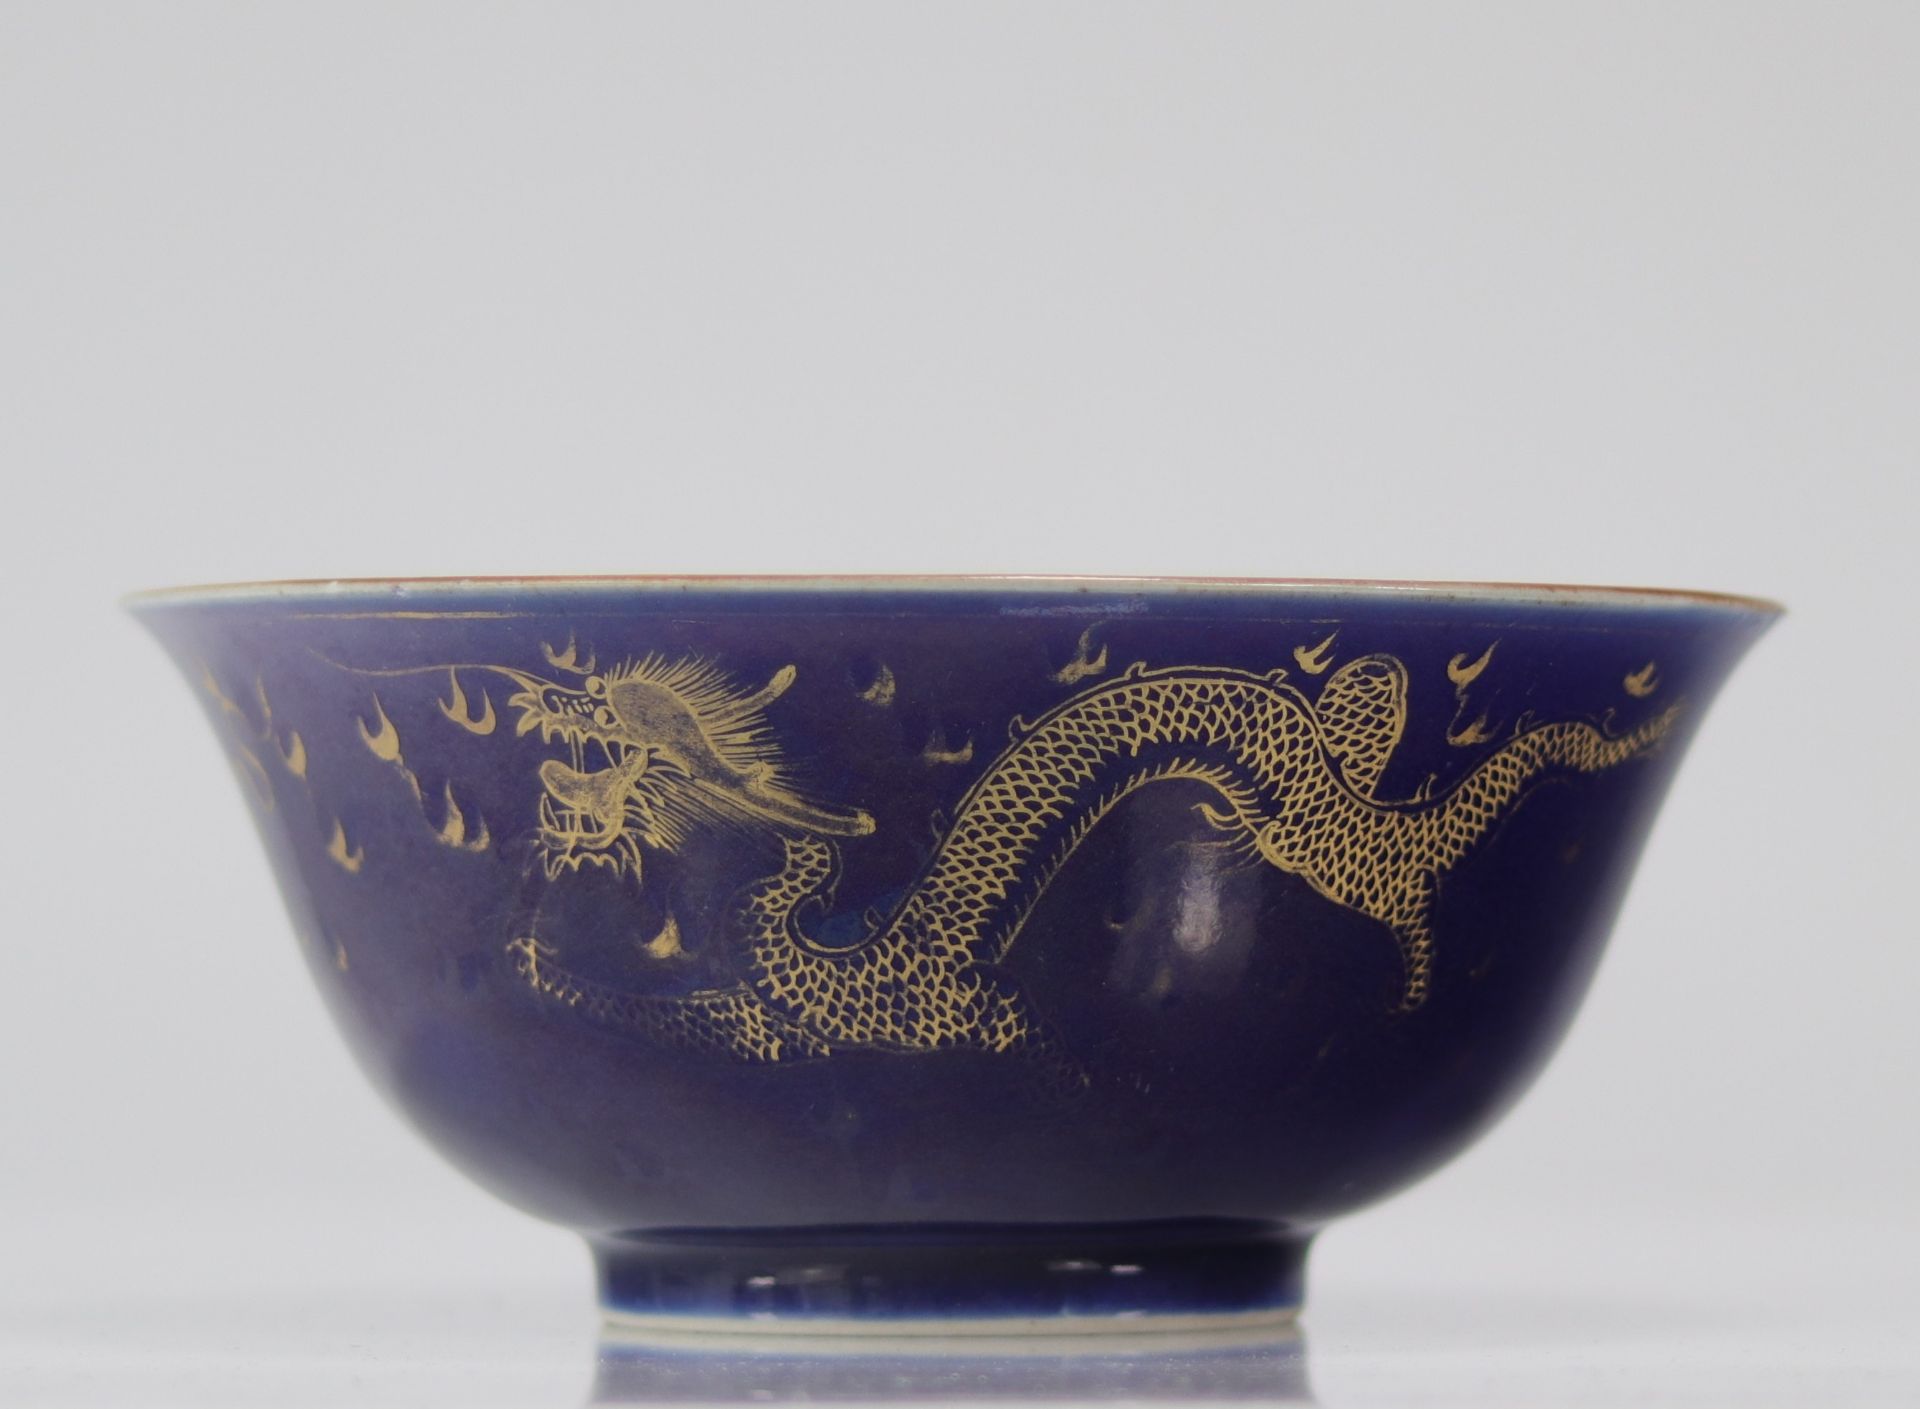 Large blue and gold powdered porcelain bowl with 18th century dragon decoration